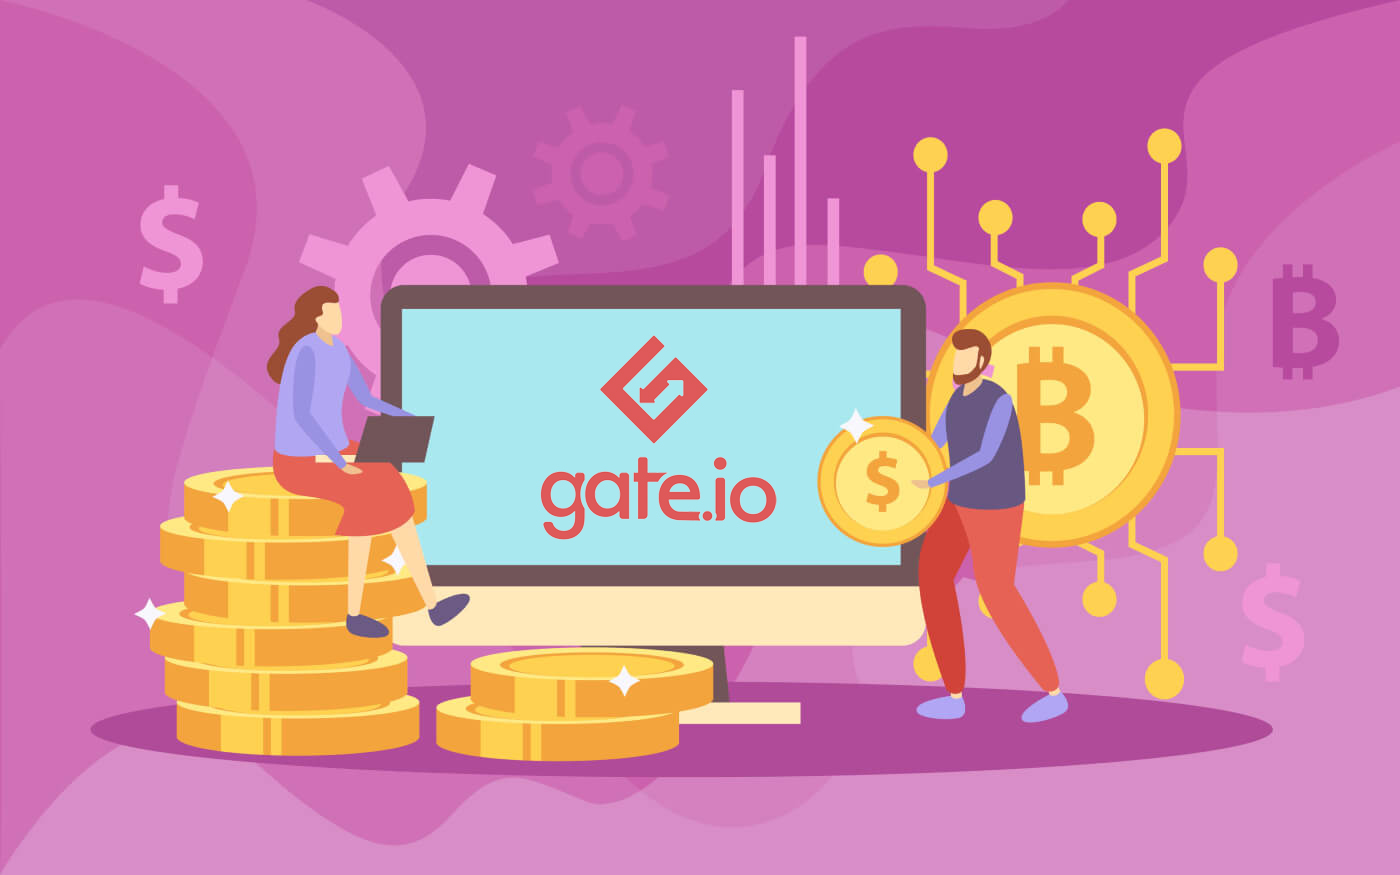 How to Open Account and Deposit at Gate.io